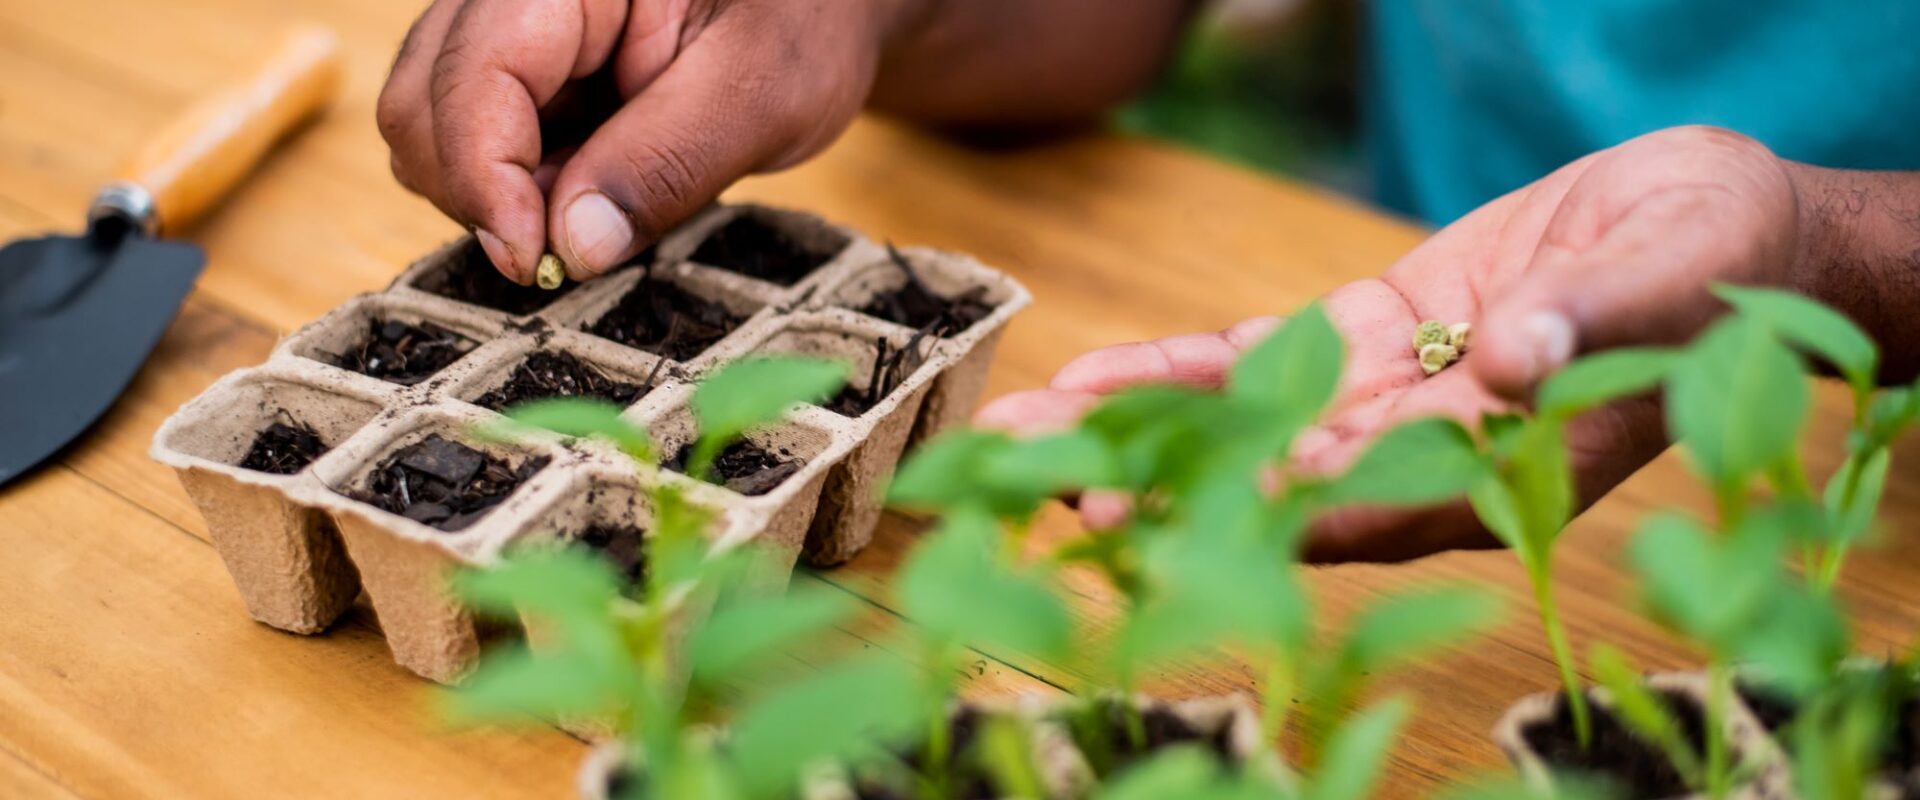 image of a multi-cell seed tray with hands planting a seed in one of the individual sections. In the foreground there are some seeds that have already sprouted